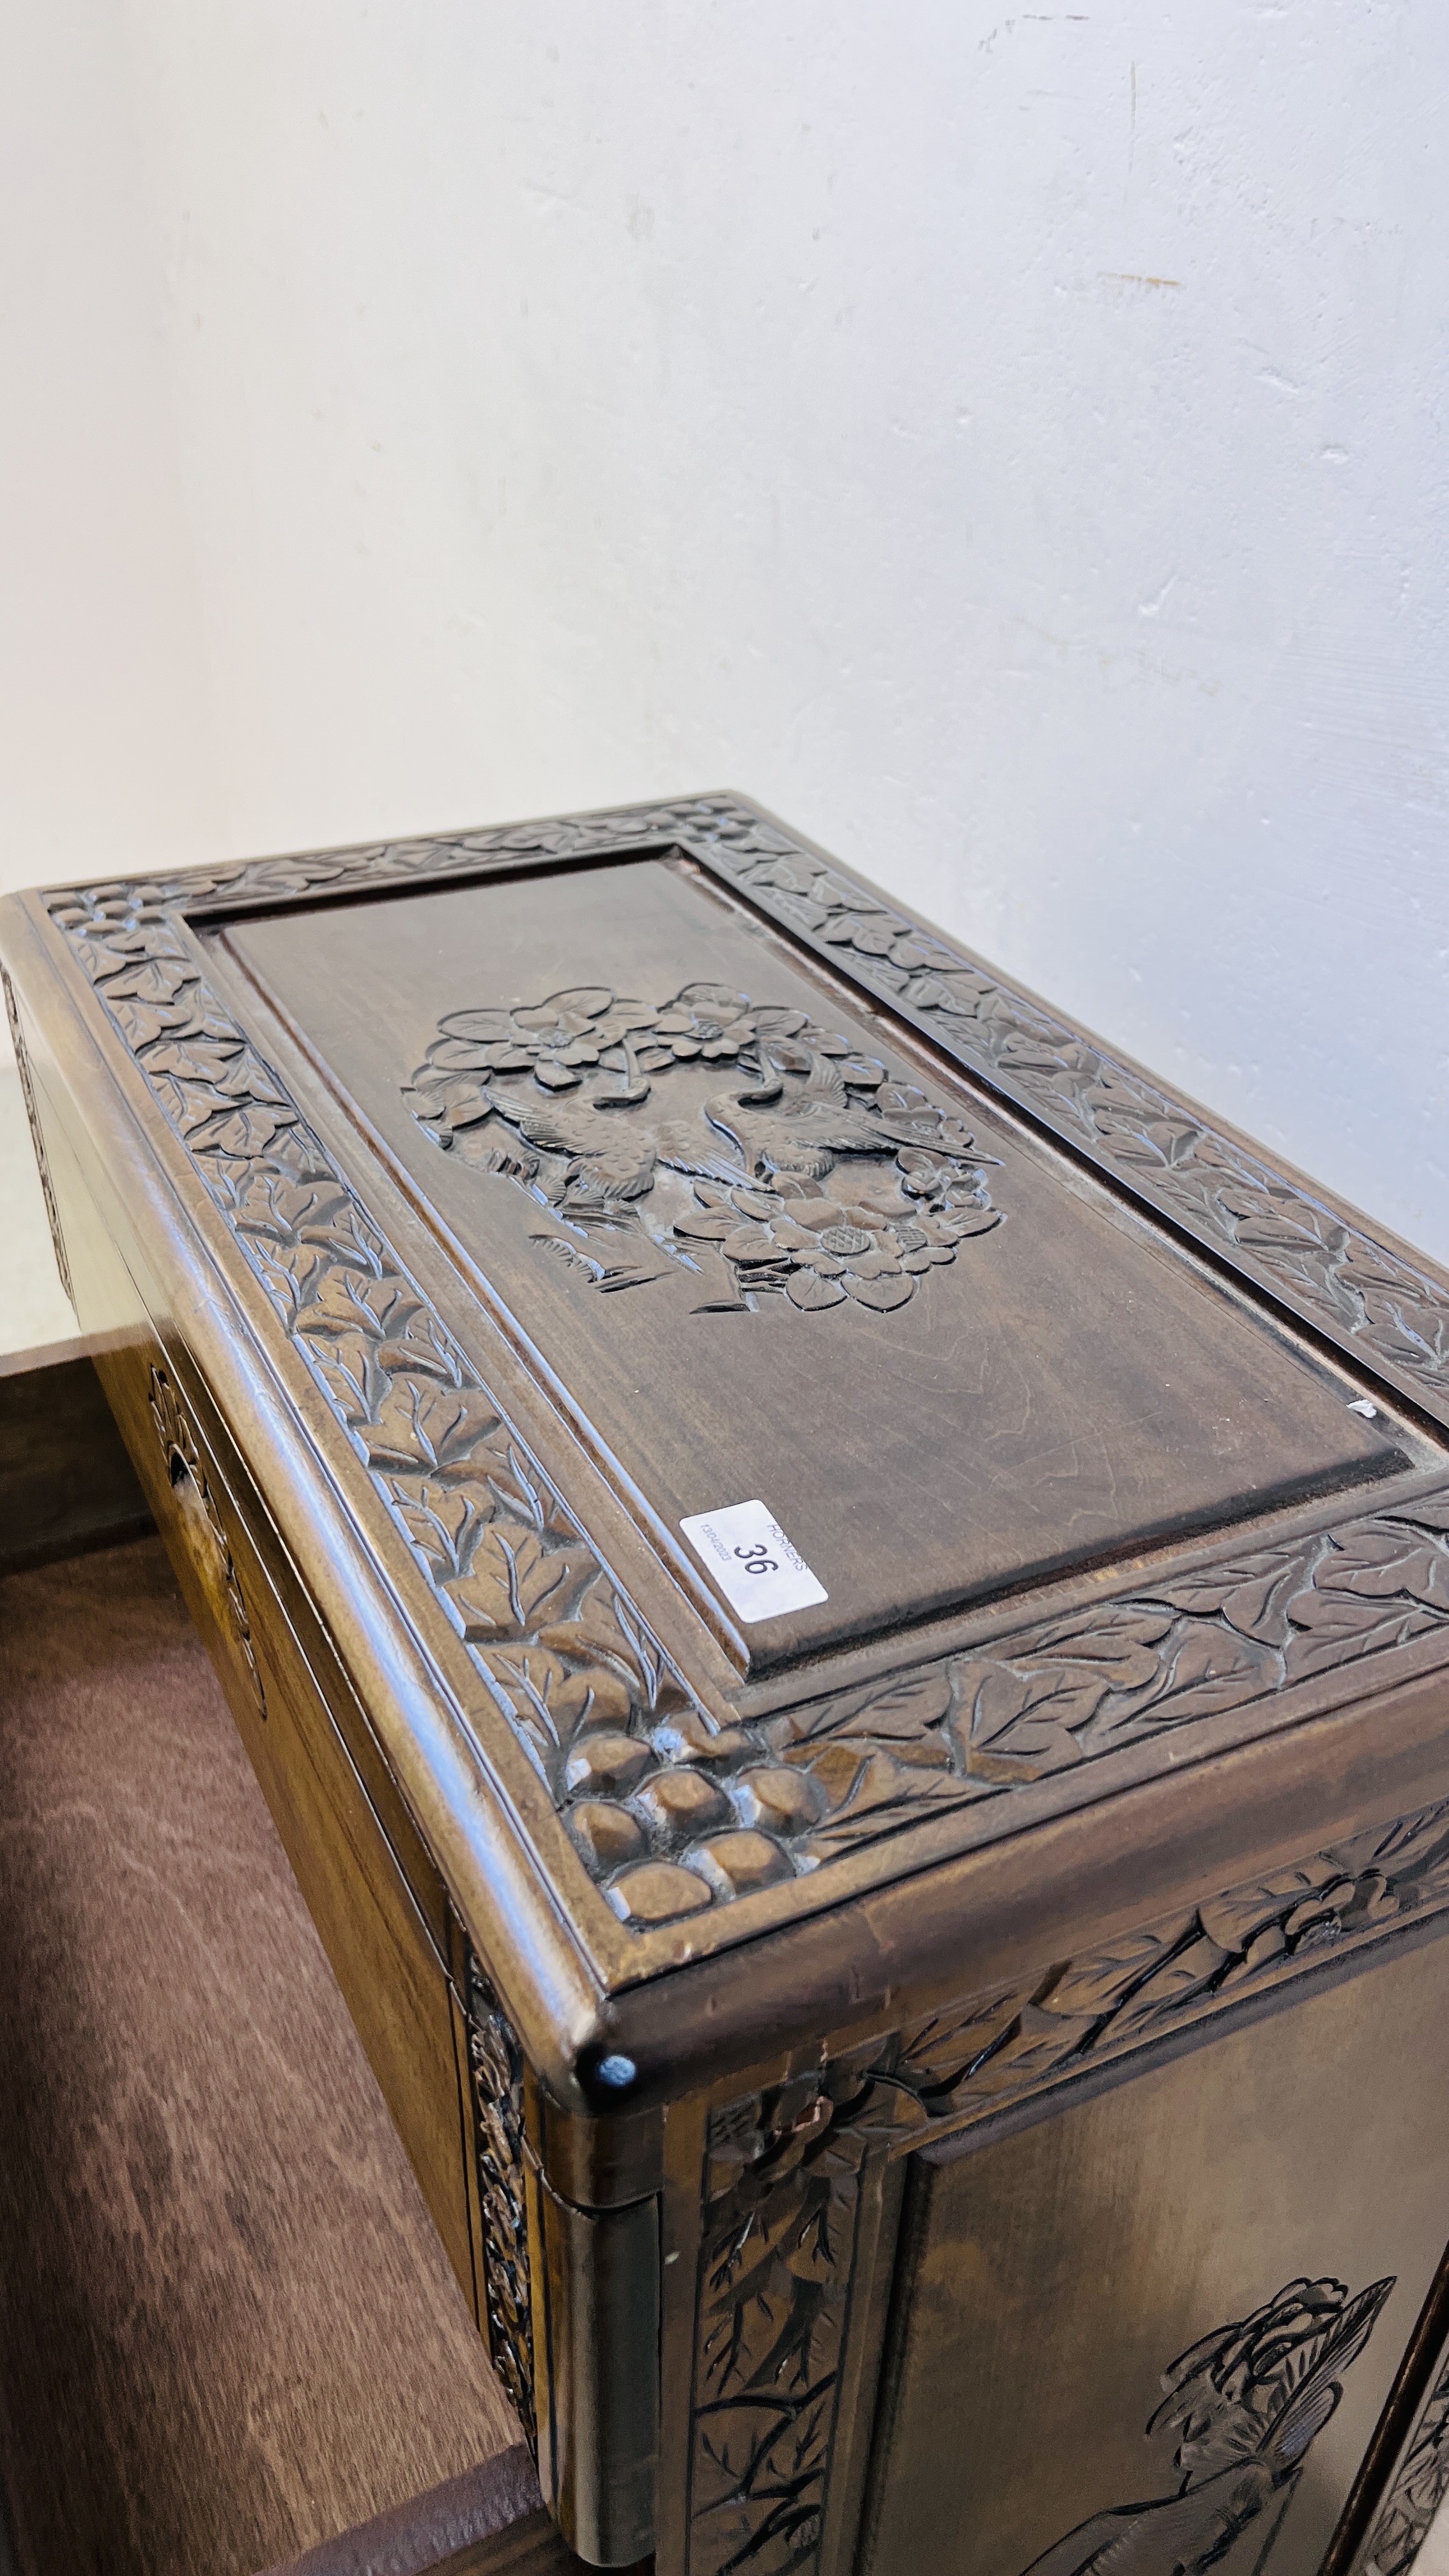 A 5 DRAWER HARDWOOD CHEST WITH A PAIR OF STALKS CARVED TO TOP AND FLORAL DECORATION CARVING - W - Image 11 of 11